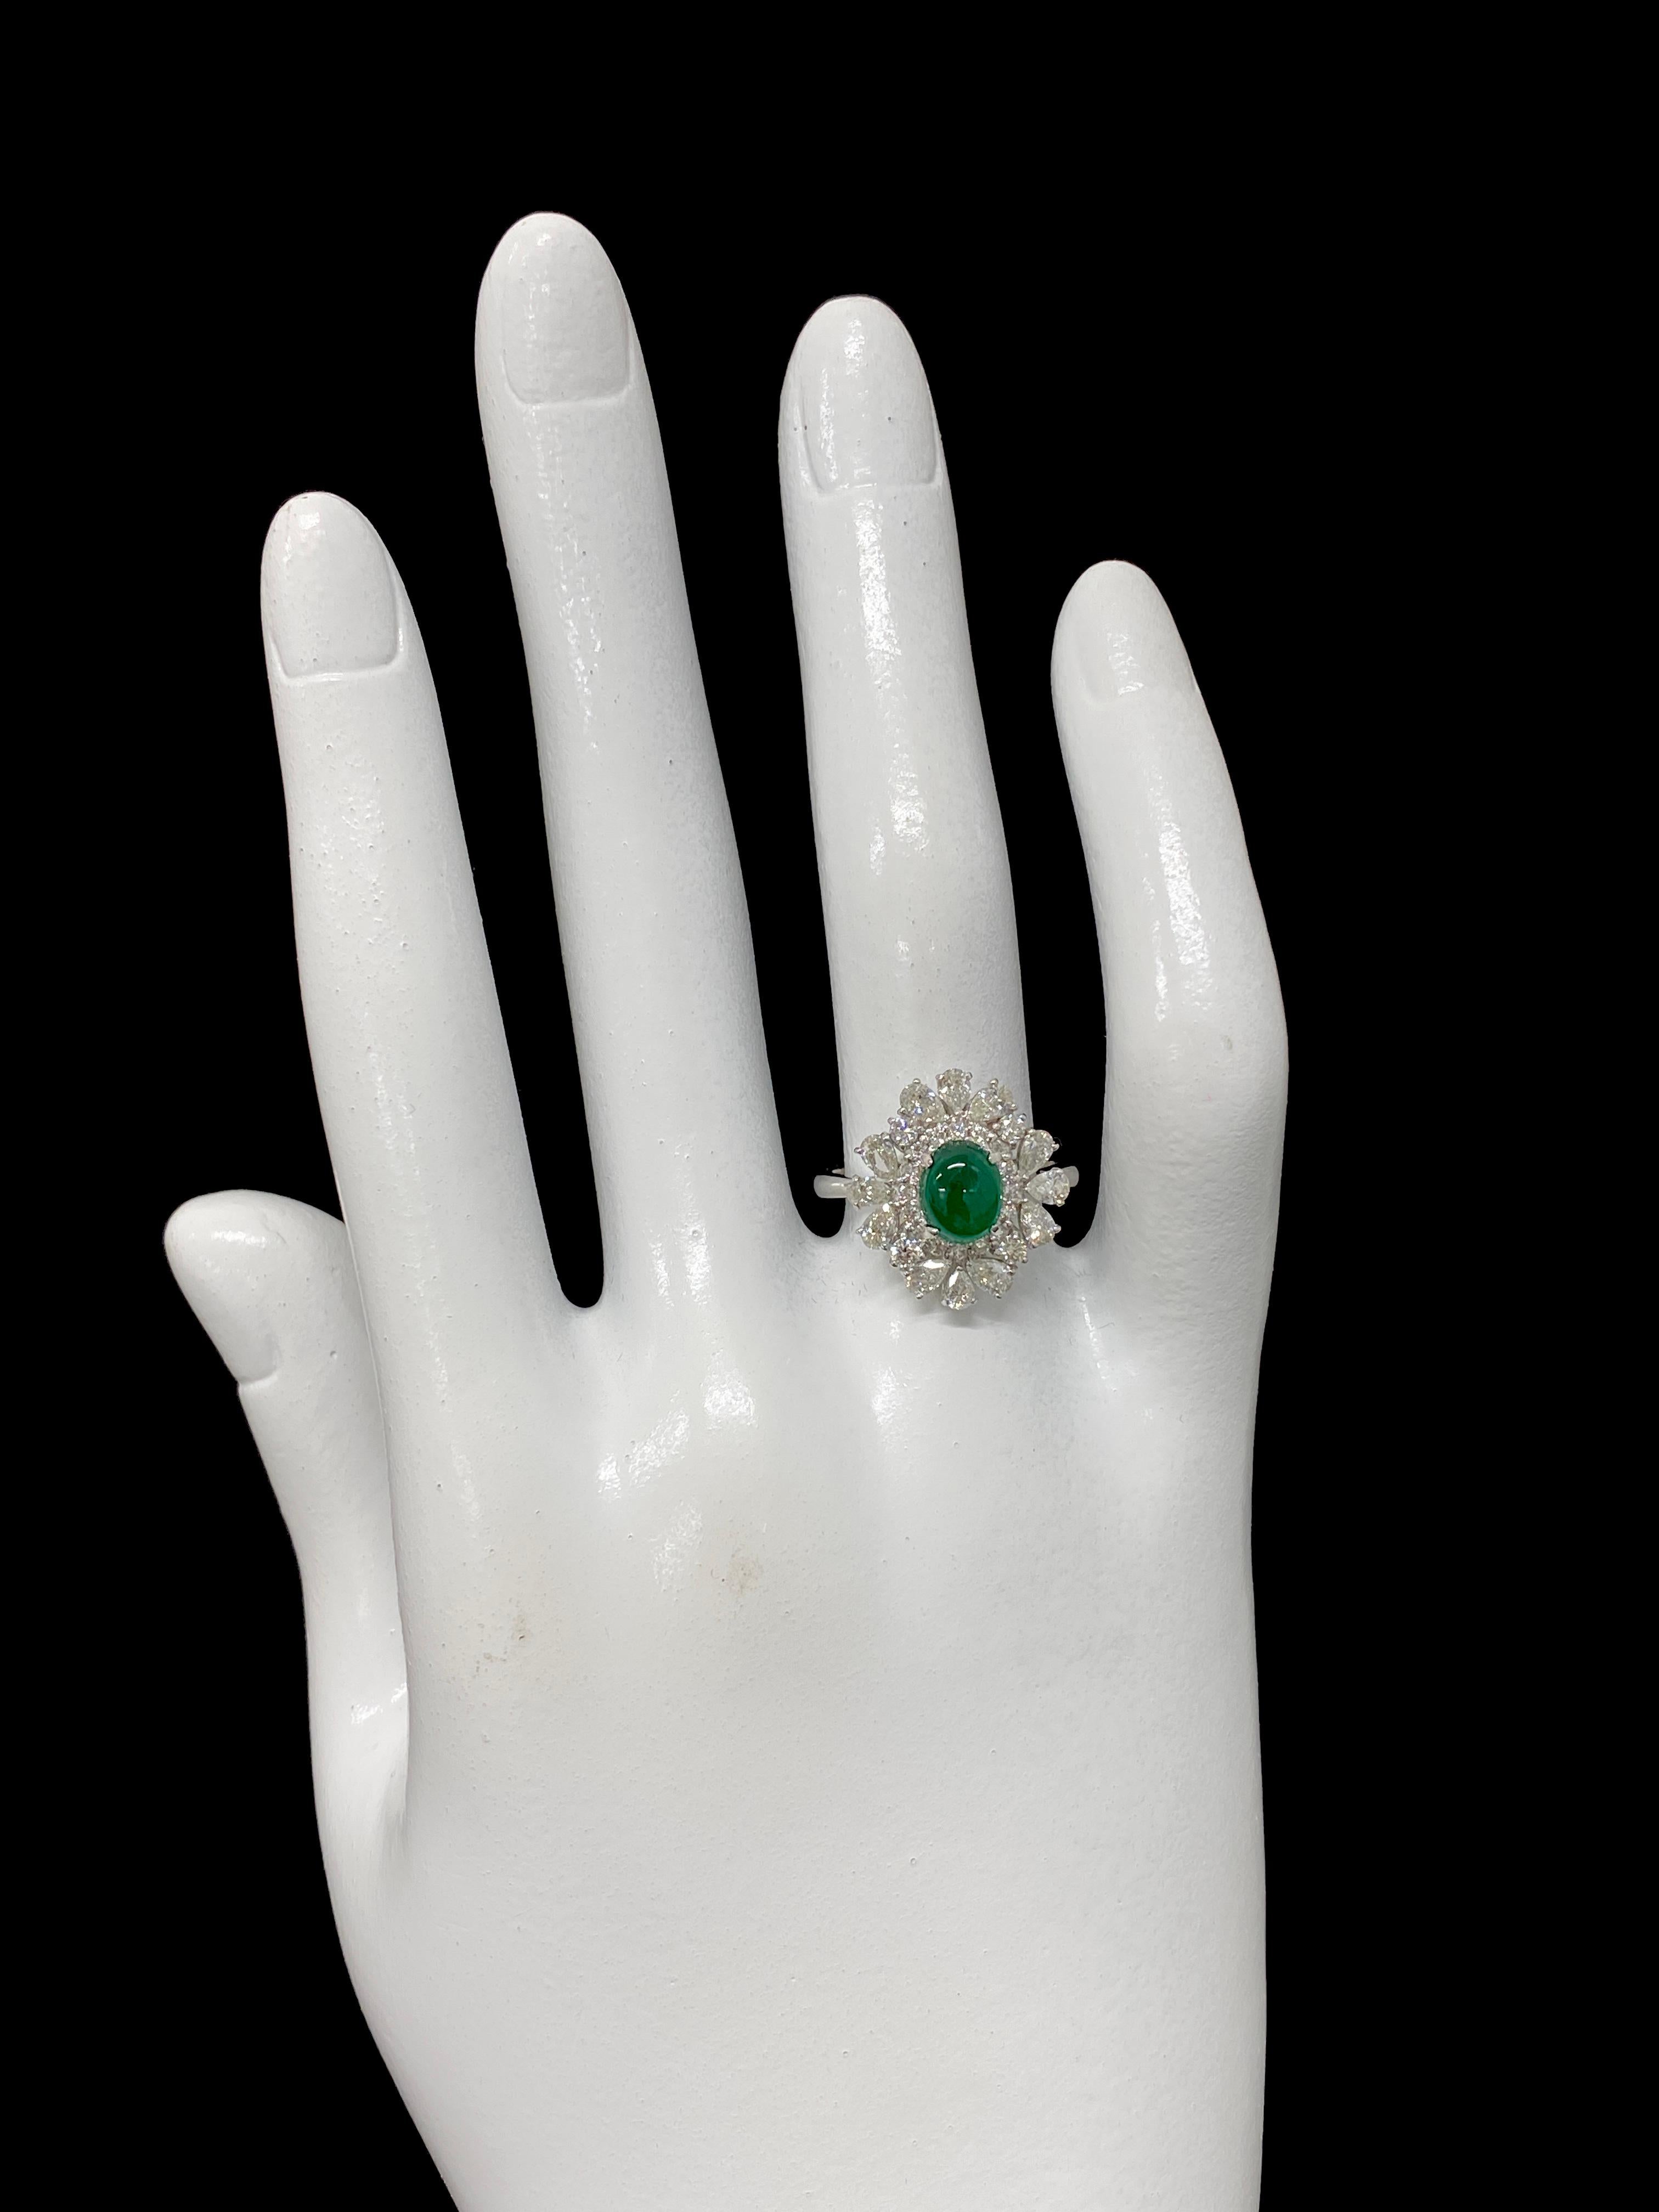 1.13 Carat Natural Emerald Cabochon and Diamond Ring Set in Platinum For Sale 2